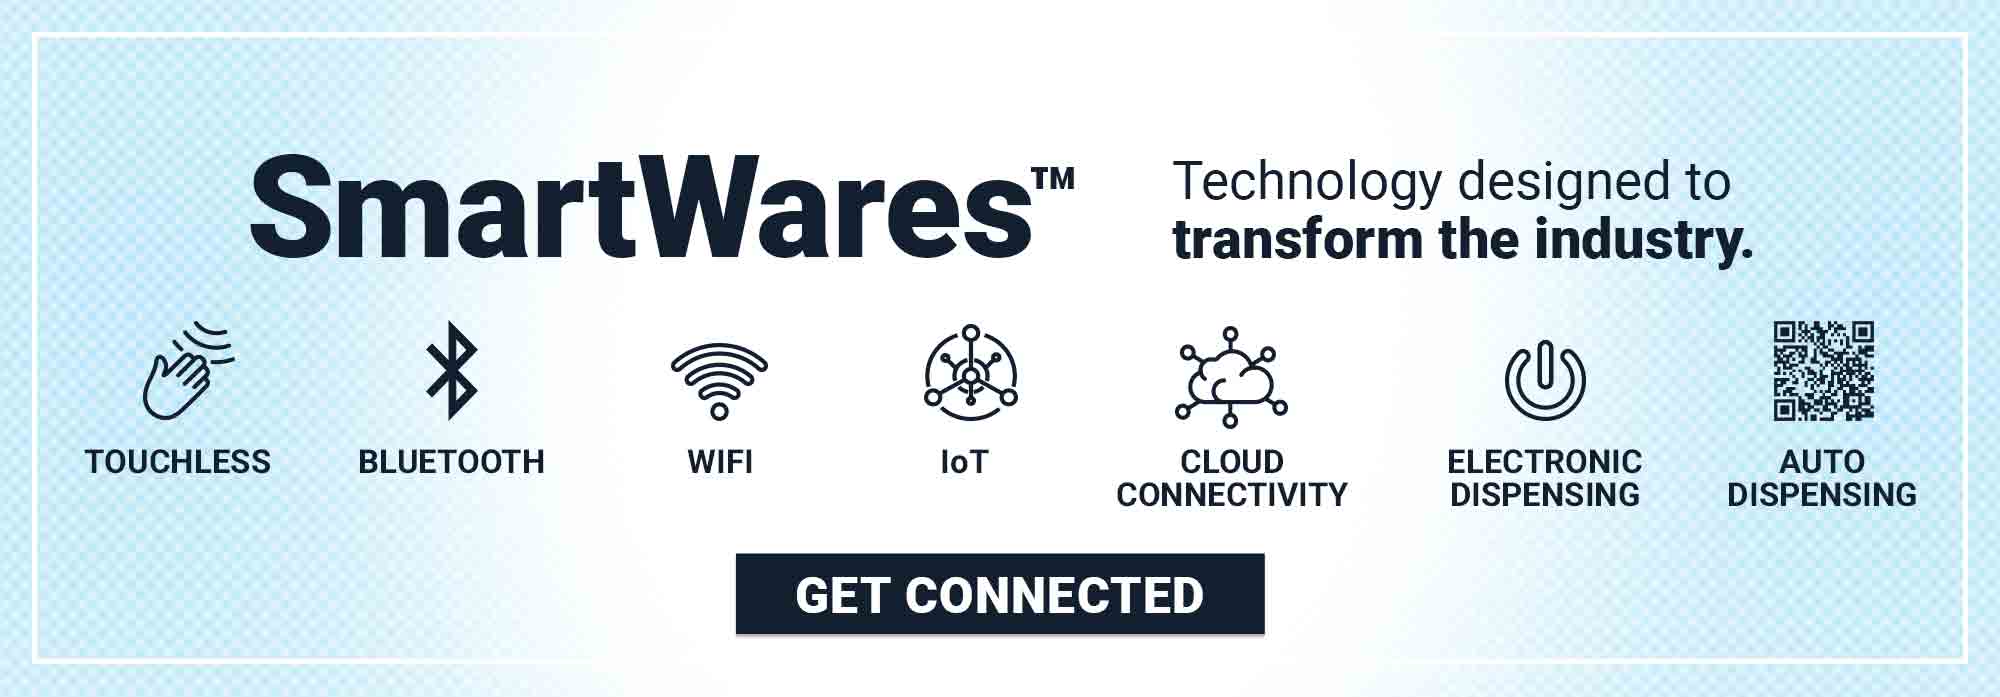 SmartWares Technology designed to transform the industry